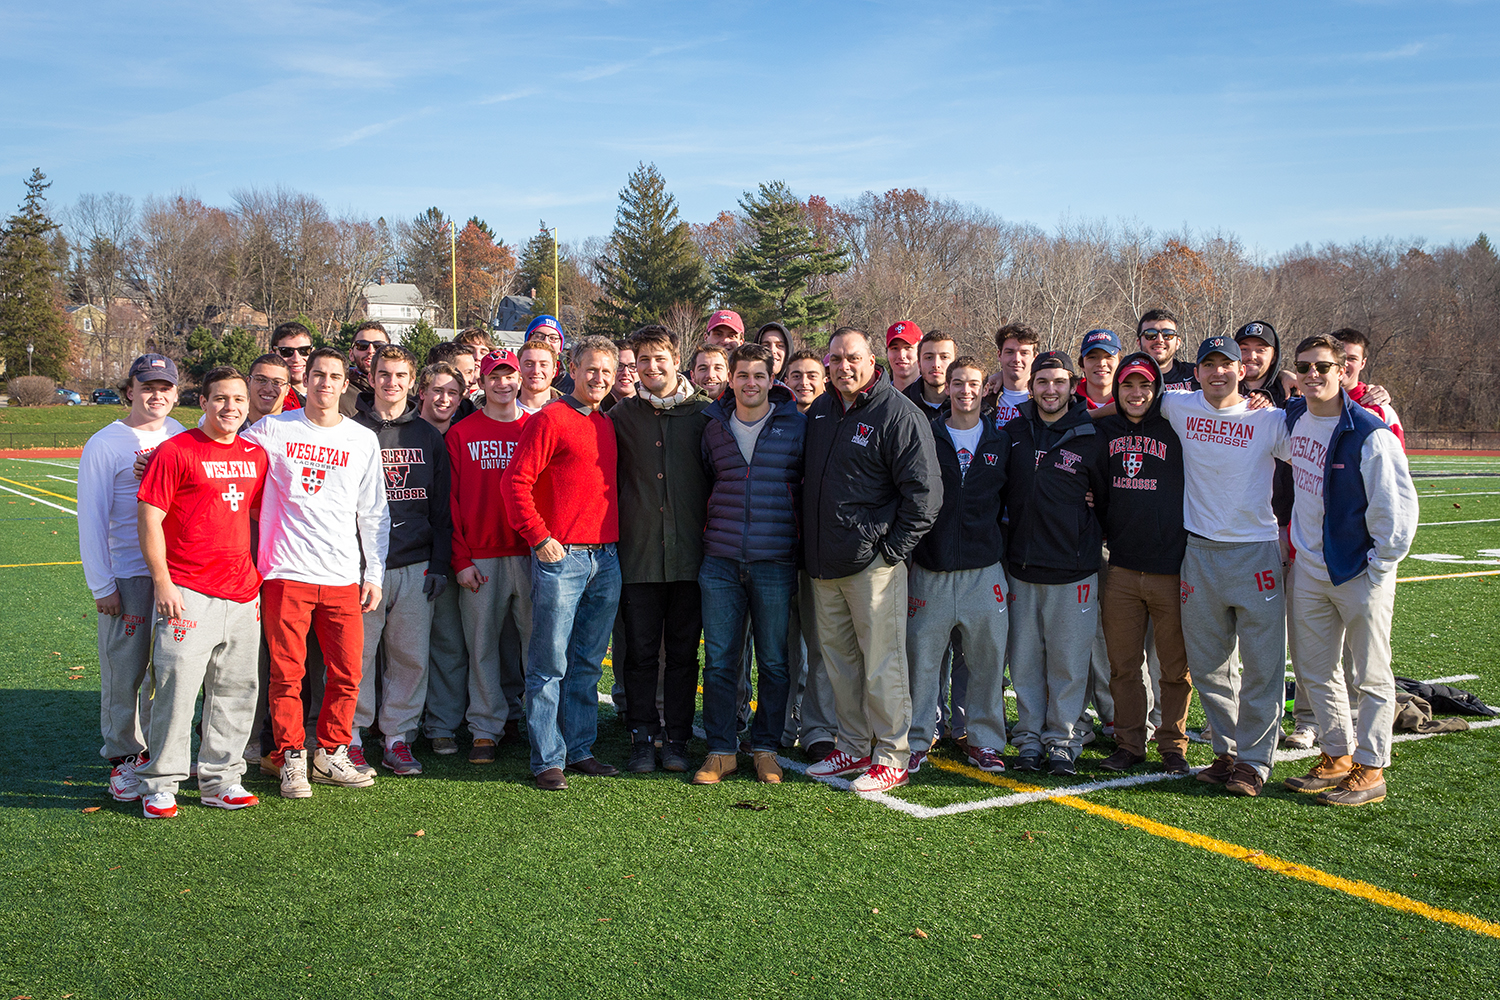 Jim, Teddy and Oliver Citrin joined Wesleyan head men's lacrosse coach John Raba and members of the 2015 team during the festivities.